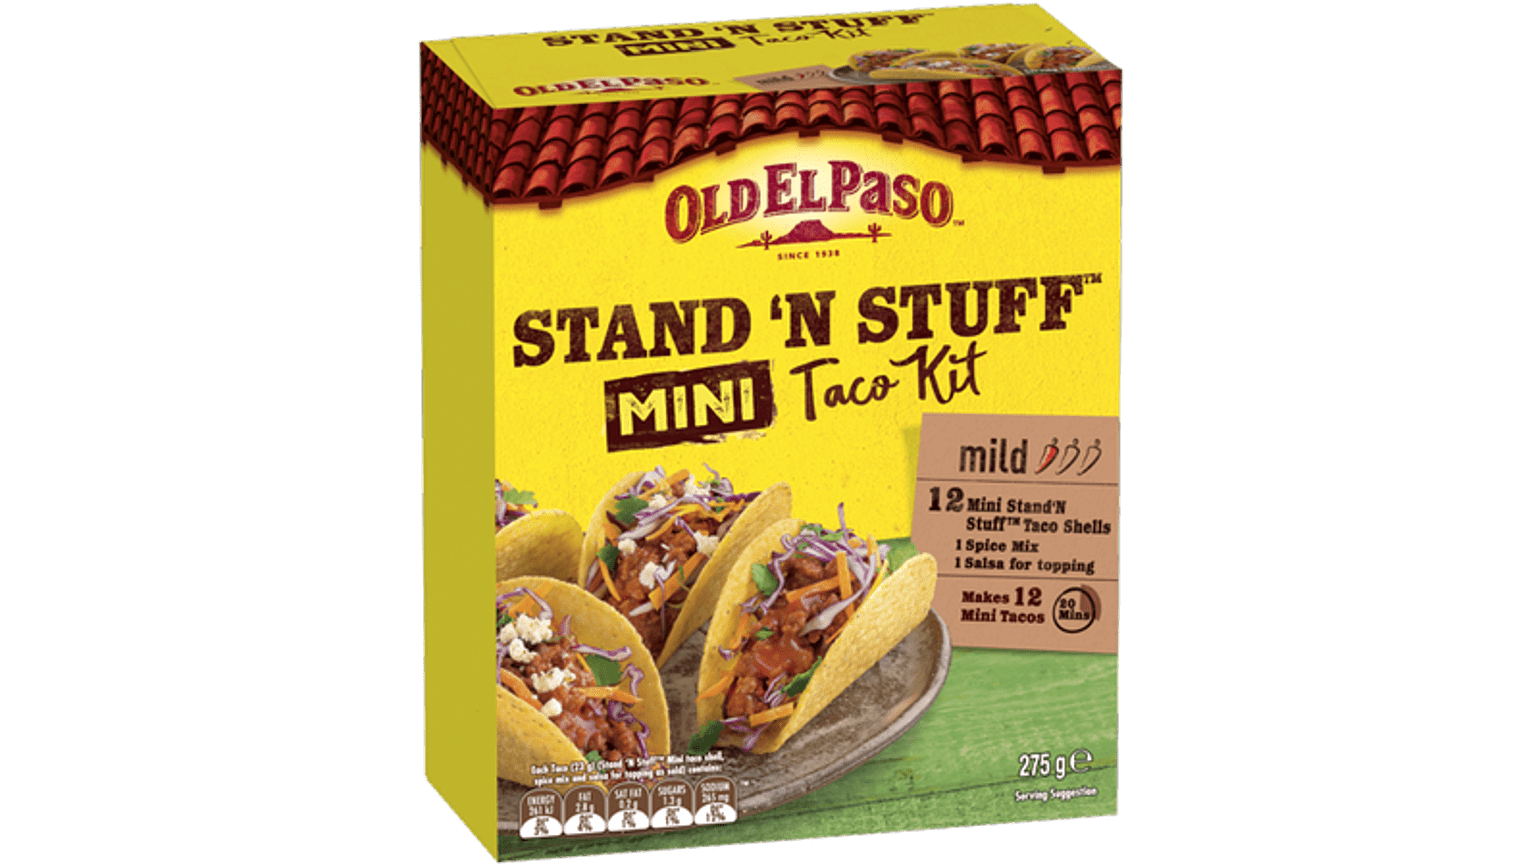 a pack of Old El Paso's stand n stuff mini taco kit mild containing mini taco shells, spice mix & salsa for topping (275g)